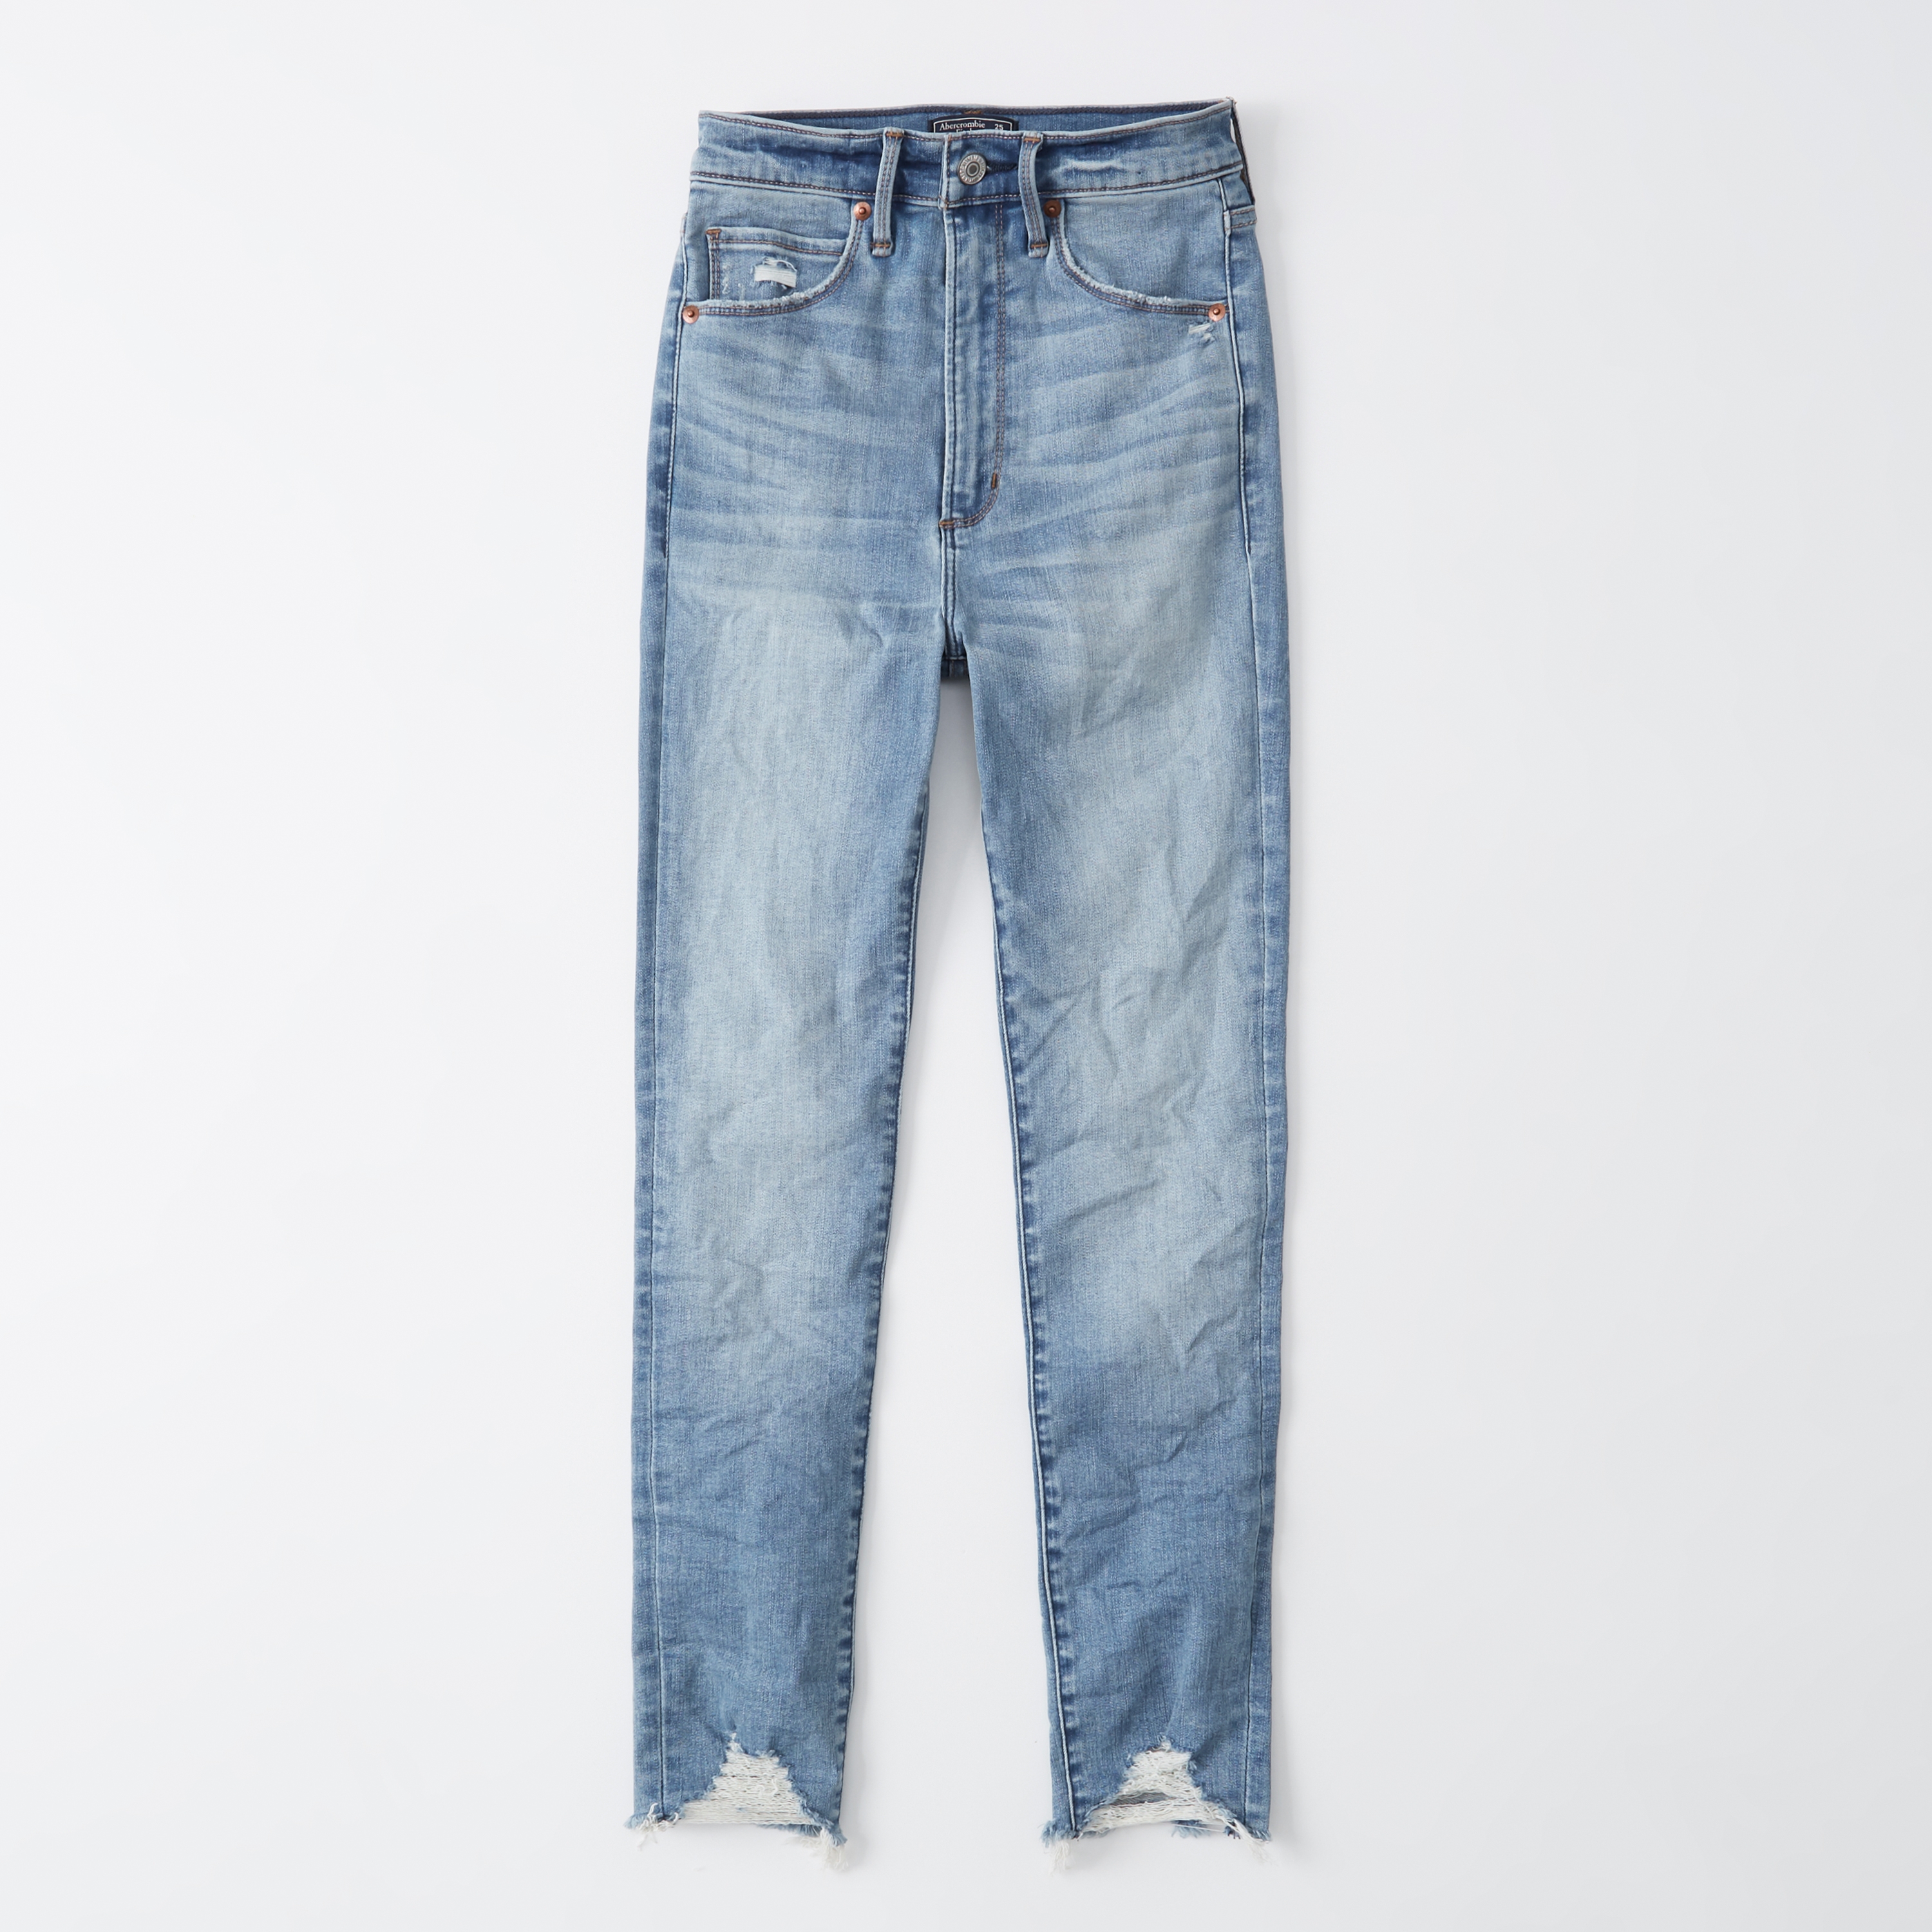 abercrombie and fitch ankle length